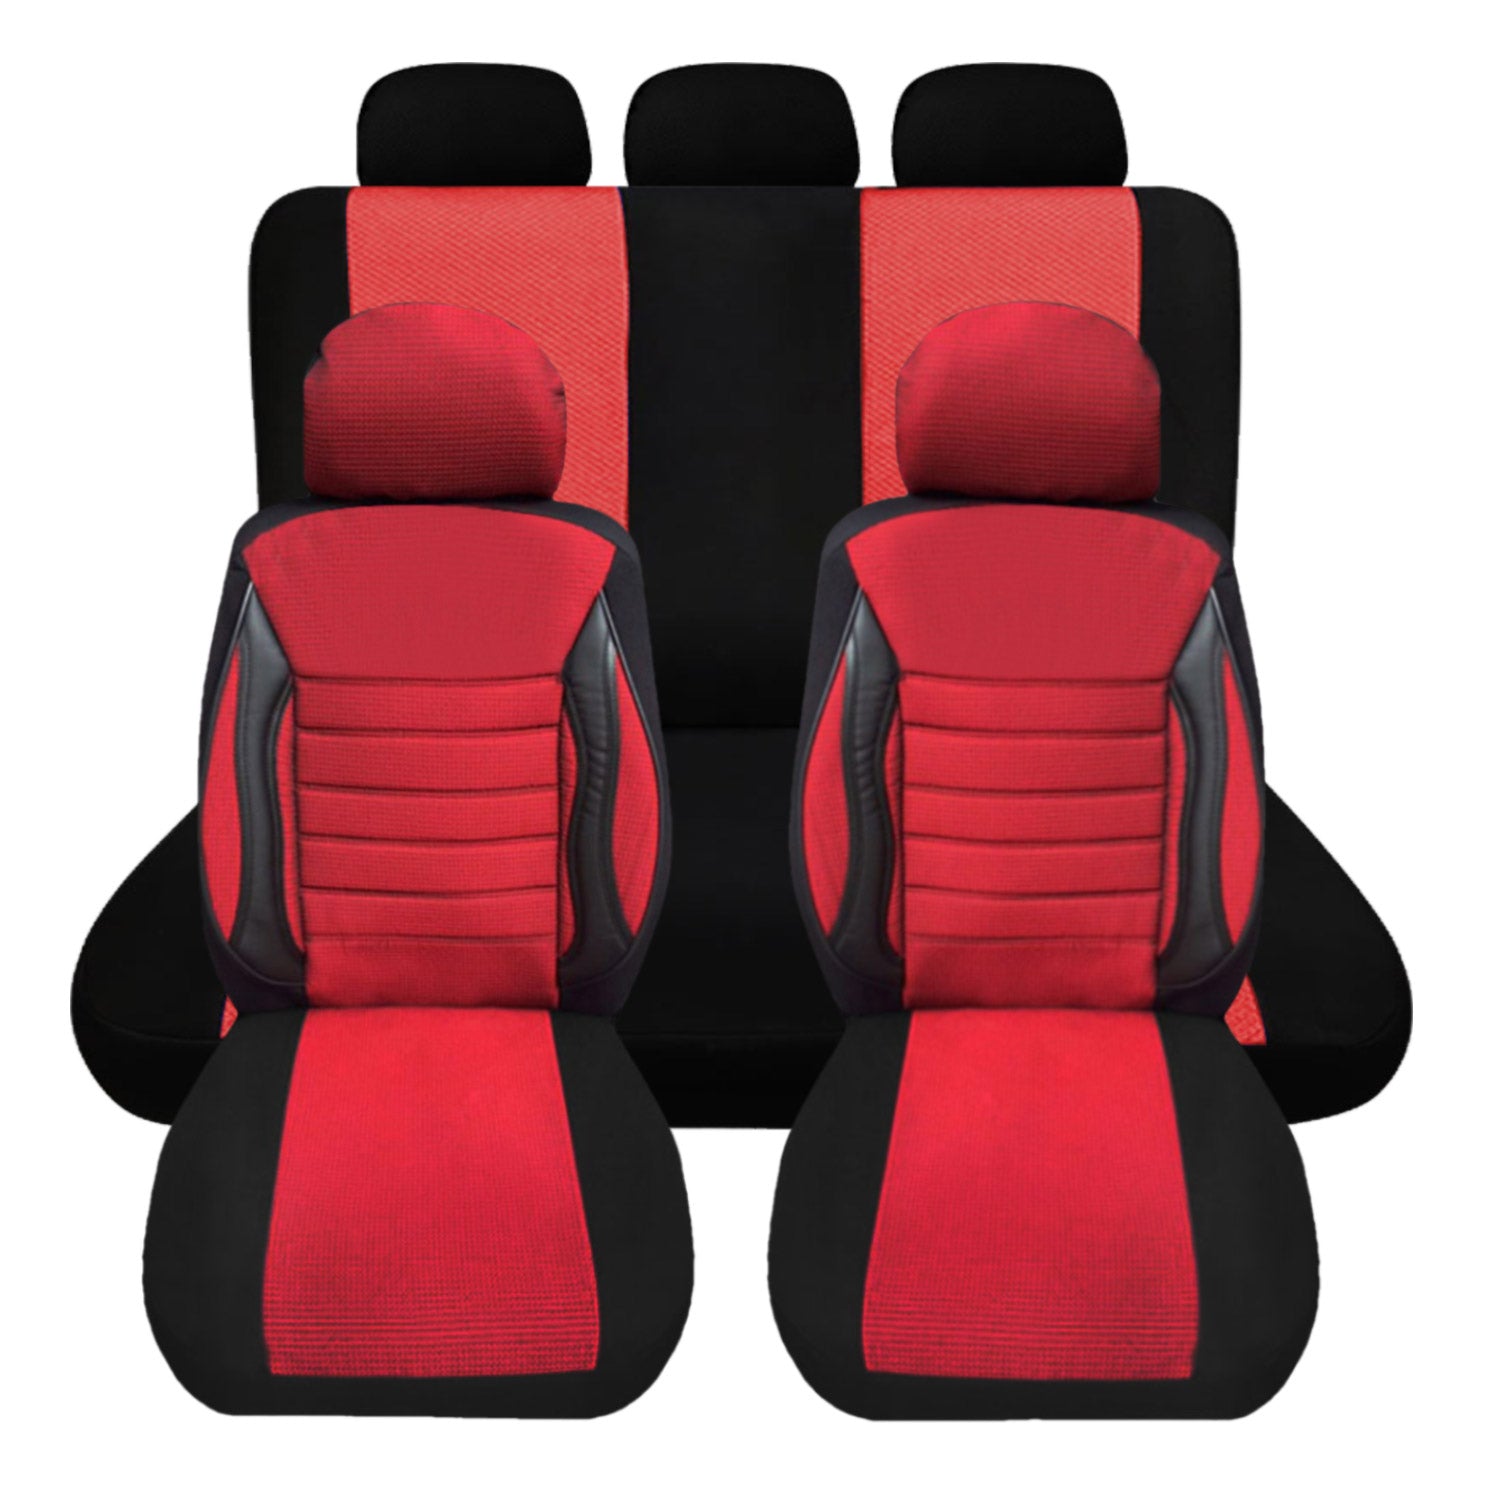 Seat Covers Seat Covers for Opel Vectra Zafira Signum Red Front